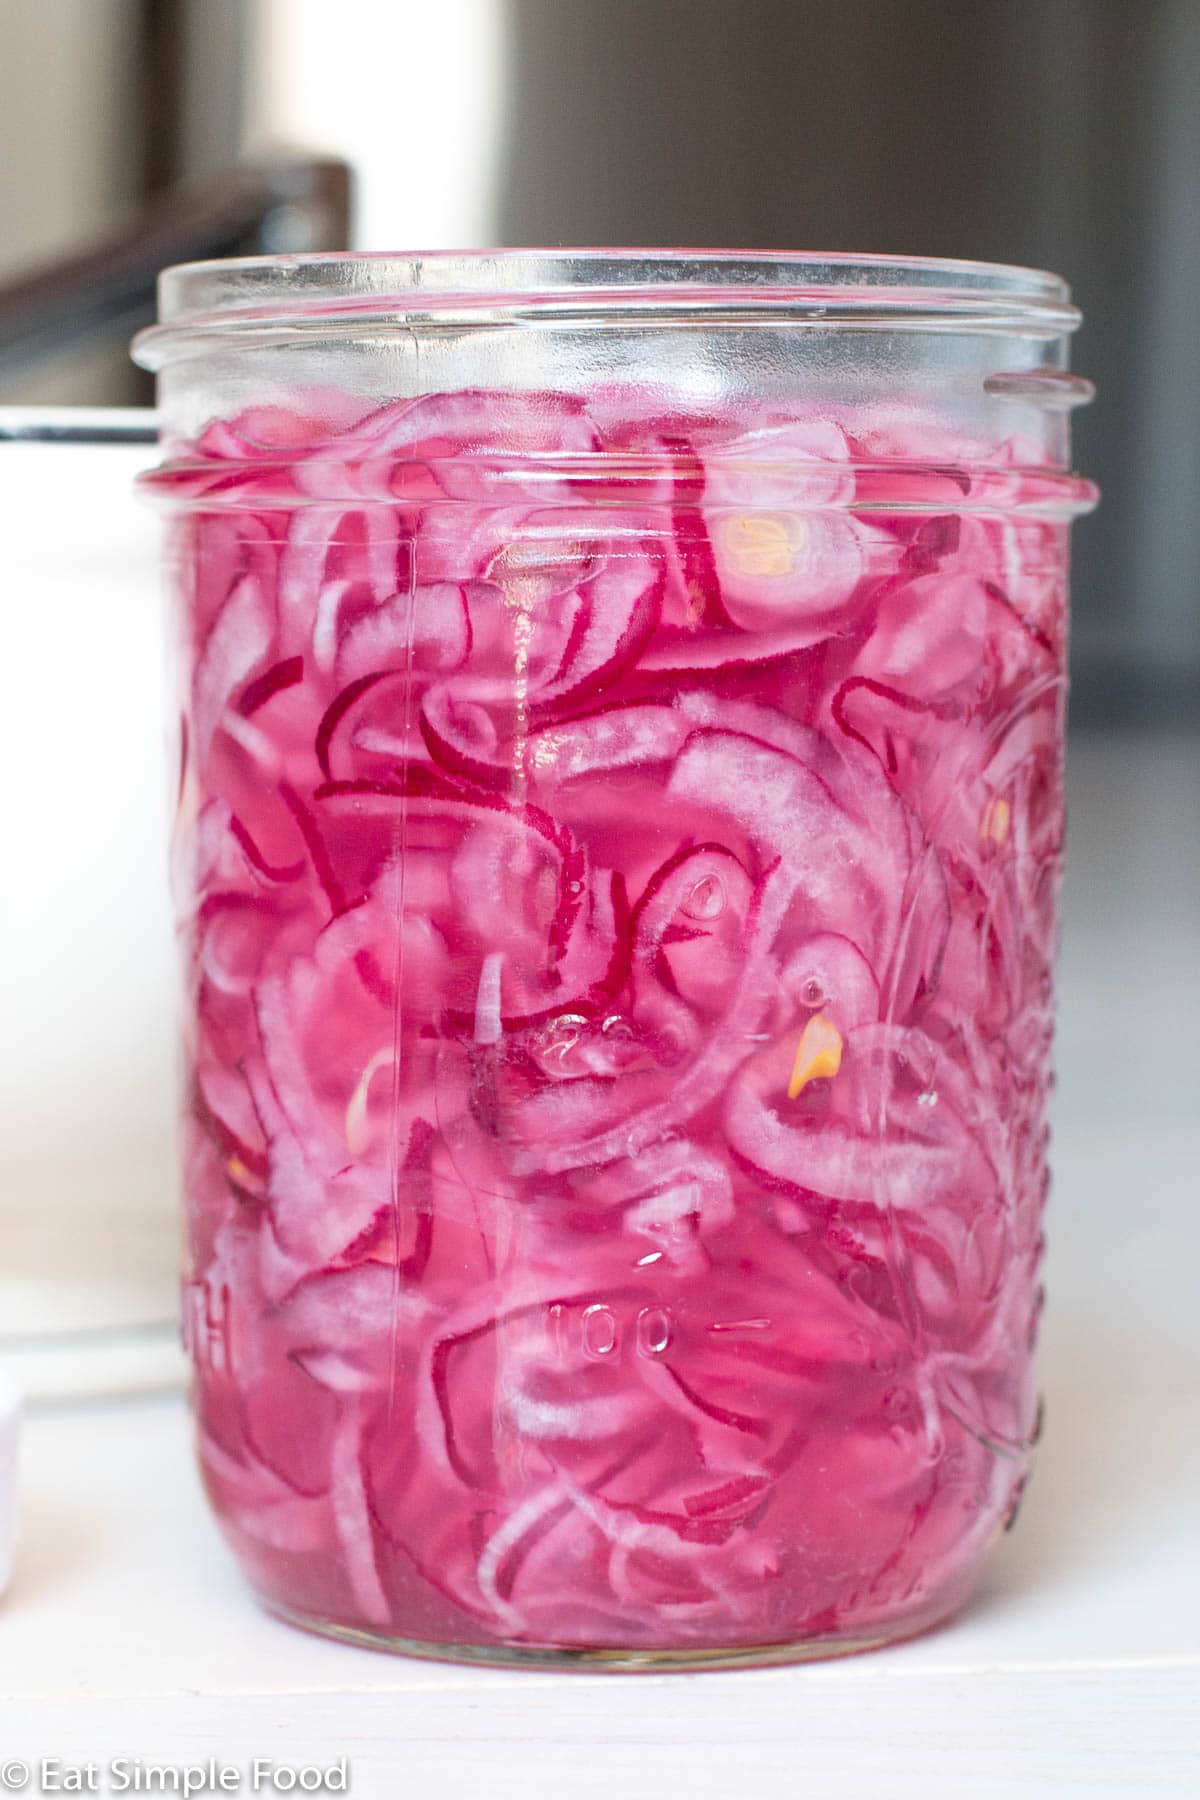 Side view of a clear pint jar of marinated sliced red onion in liquid.